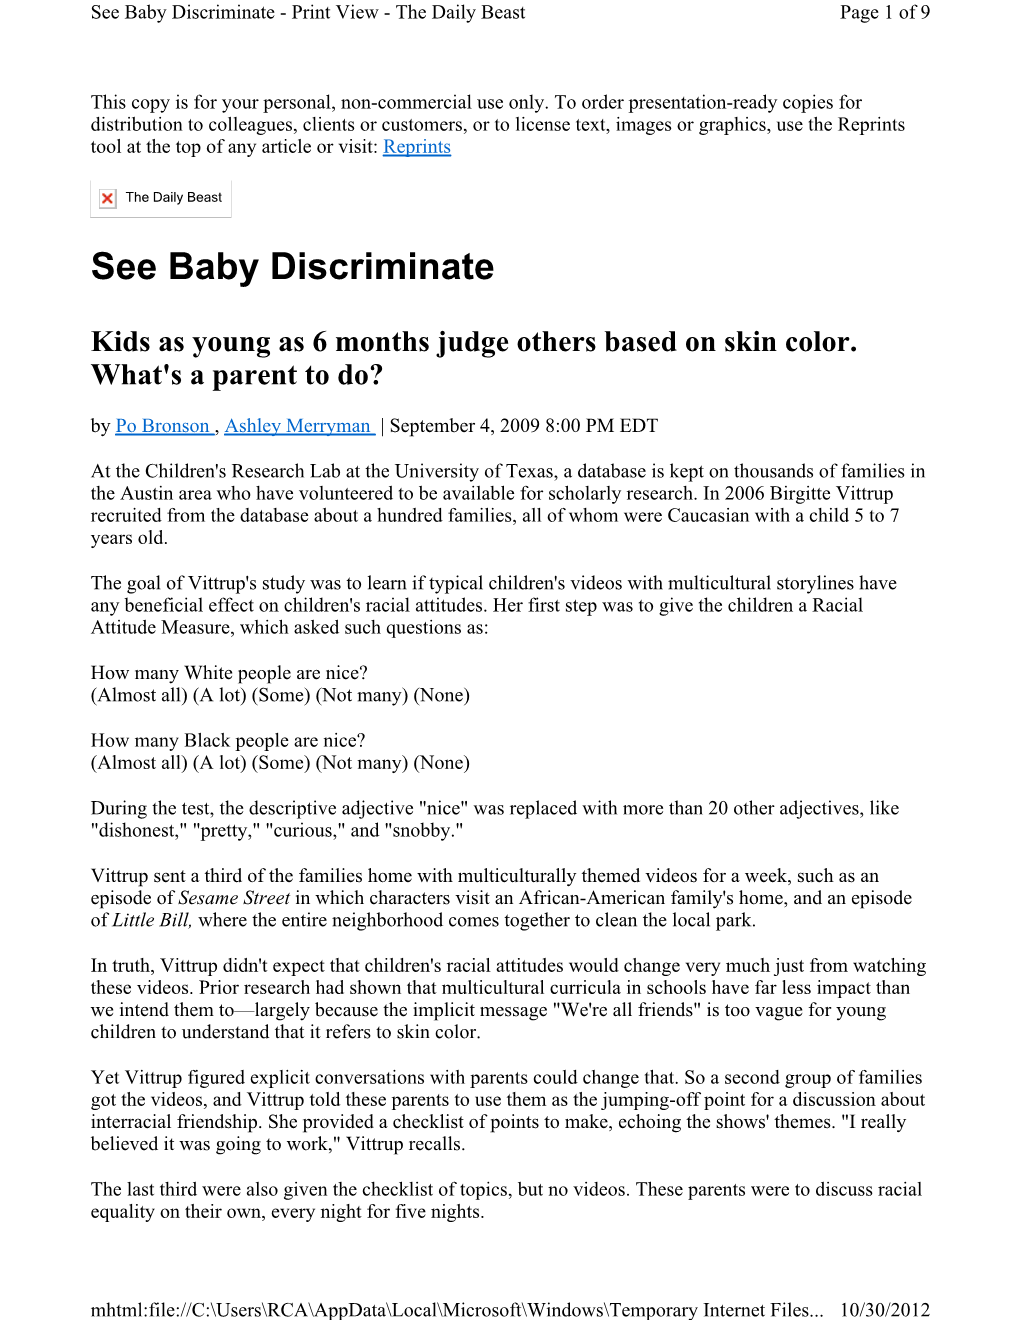 See Baby Discriminate - Print View - the Daily Beast Page 1 of 9